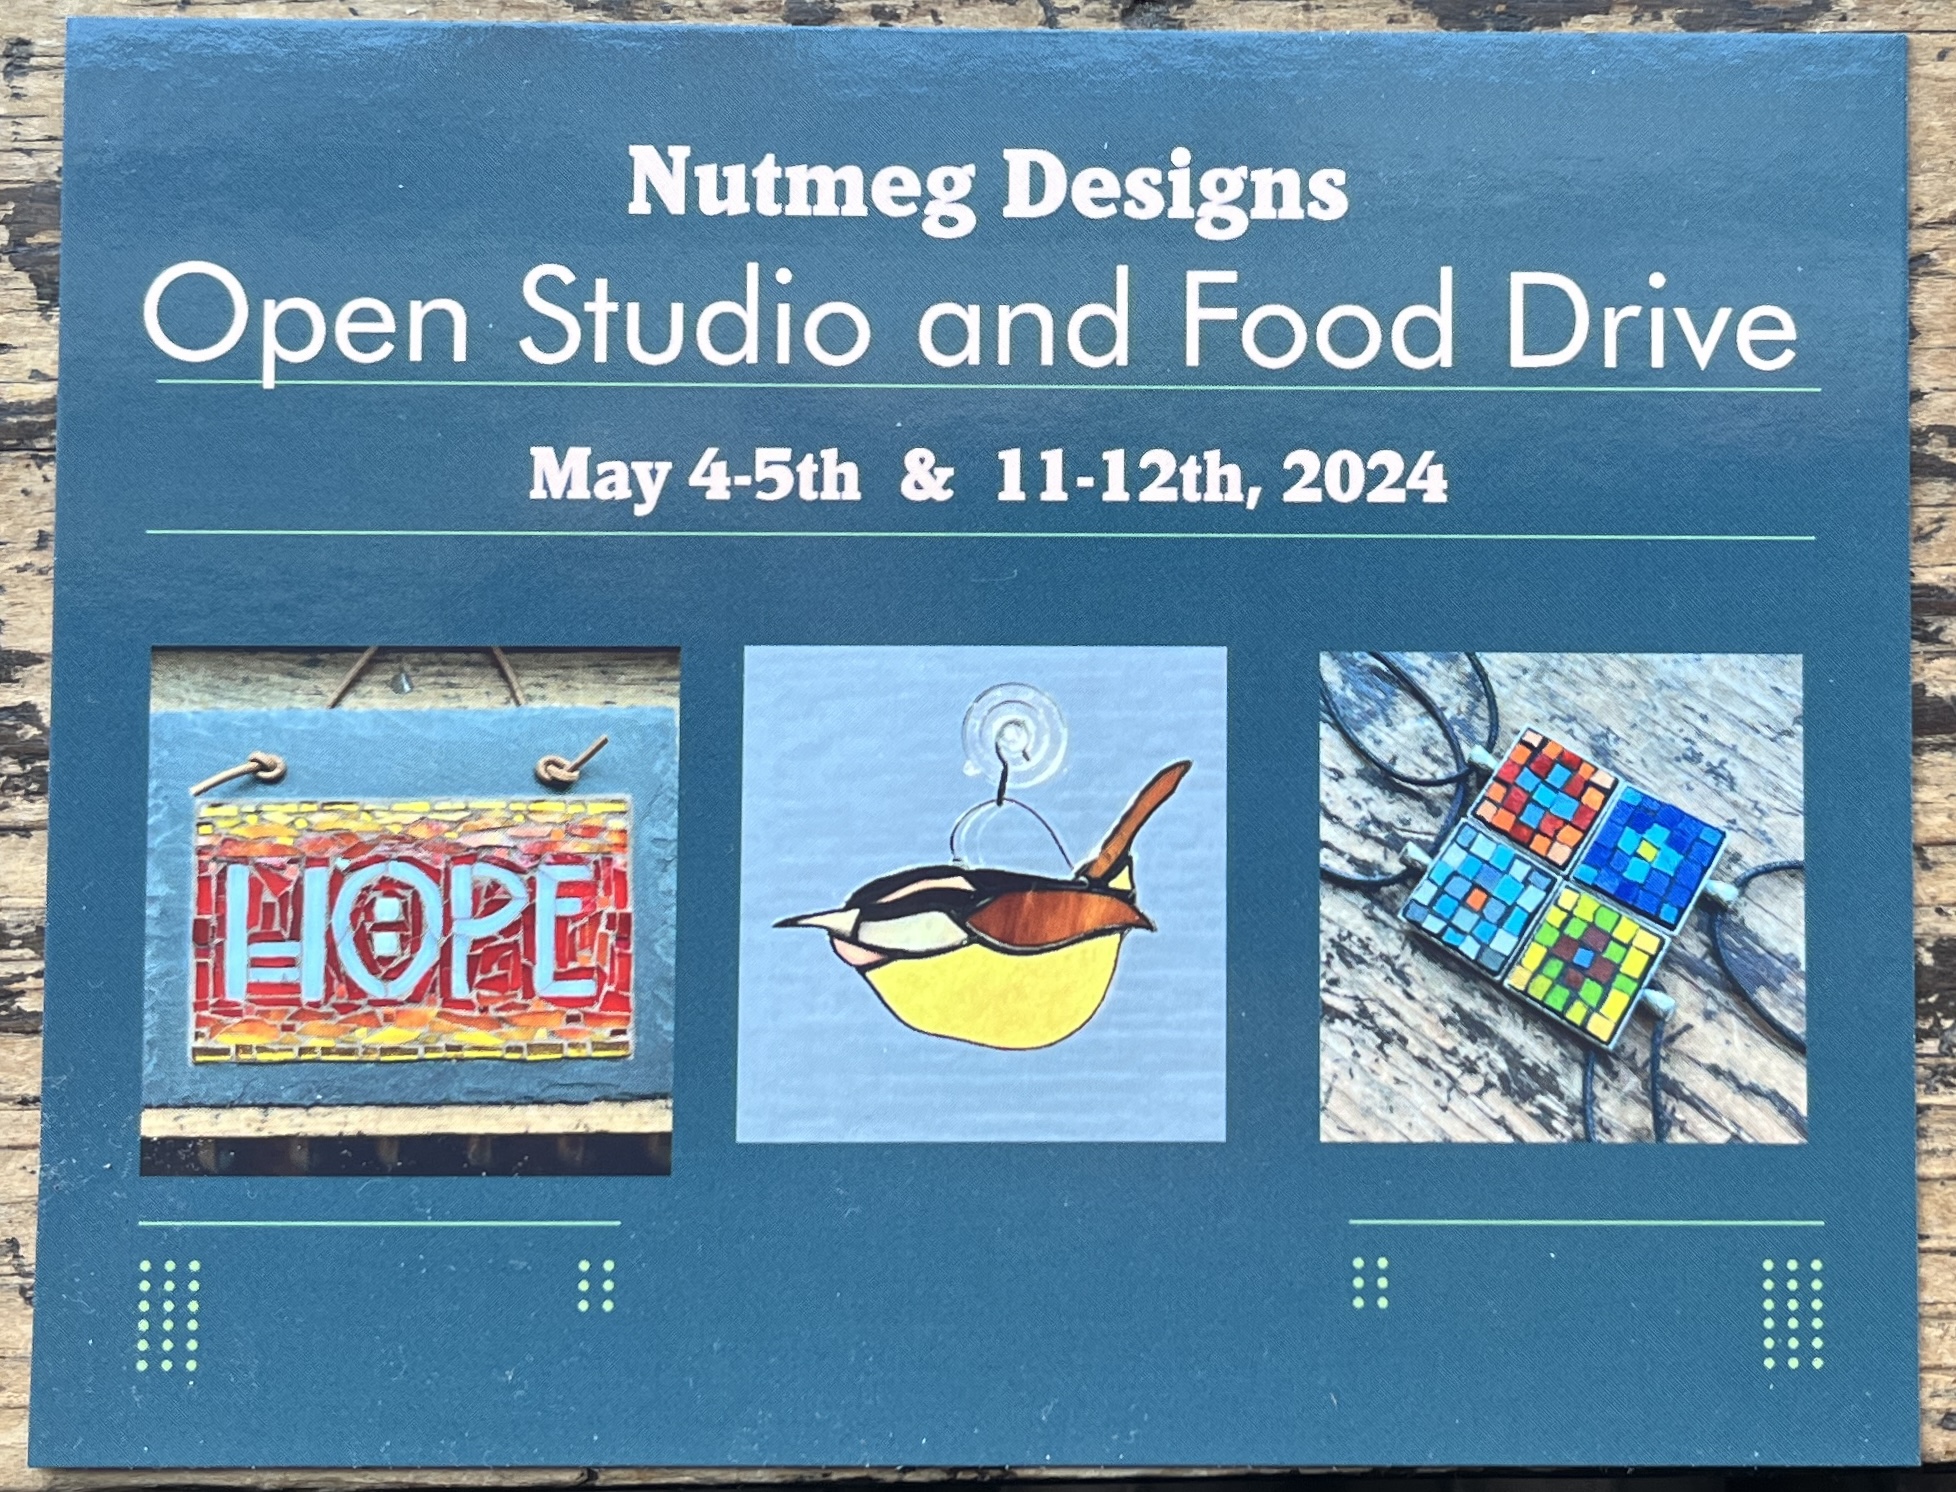 Nutmeg Designs Open Studio and Food Drive 2024 Lansdale PA